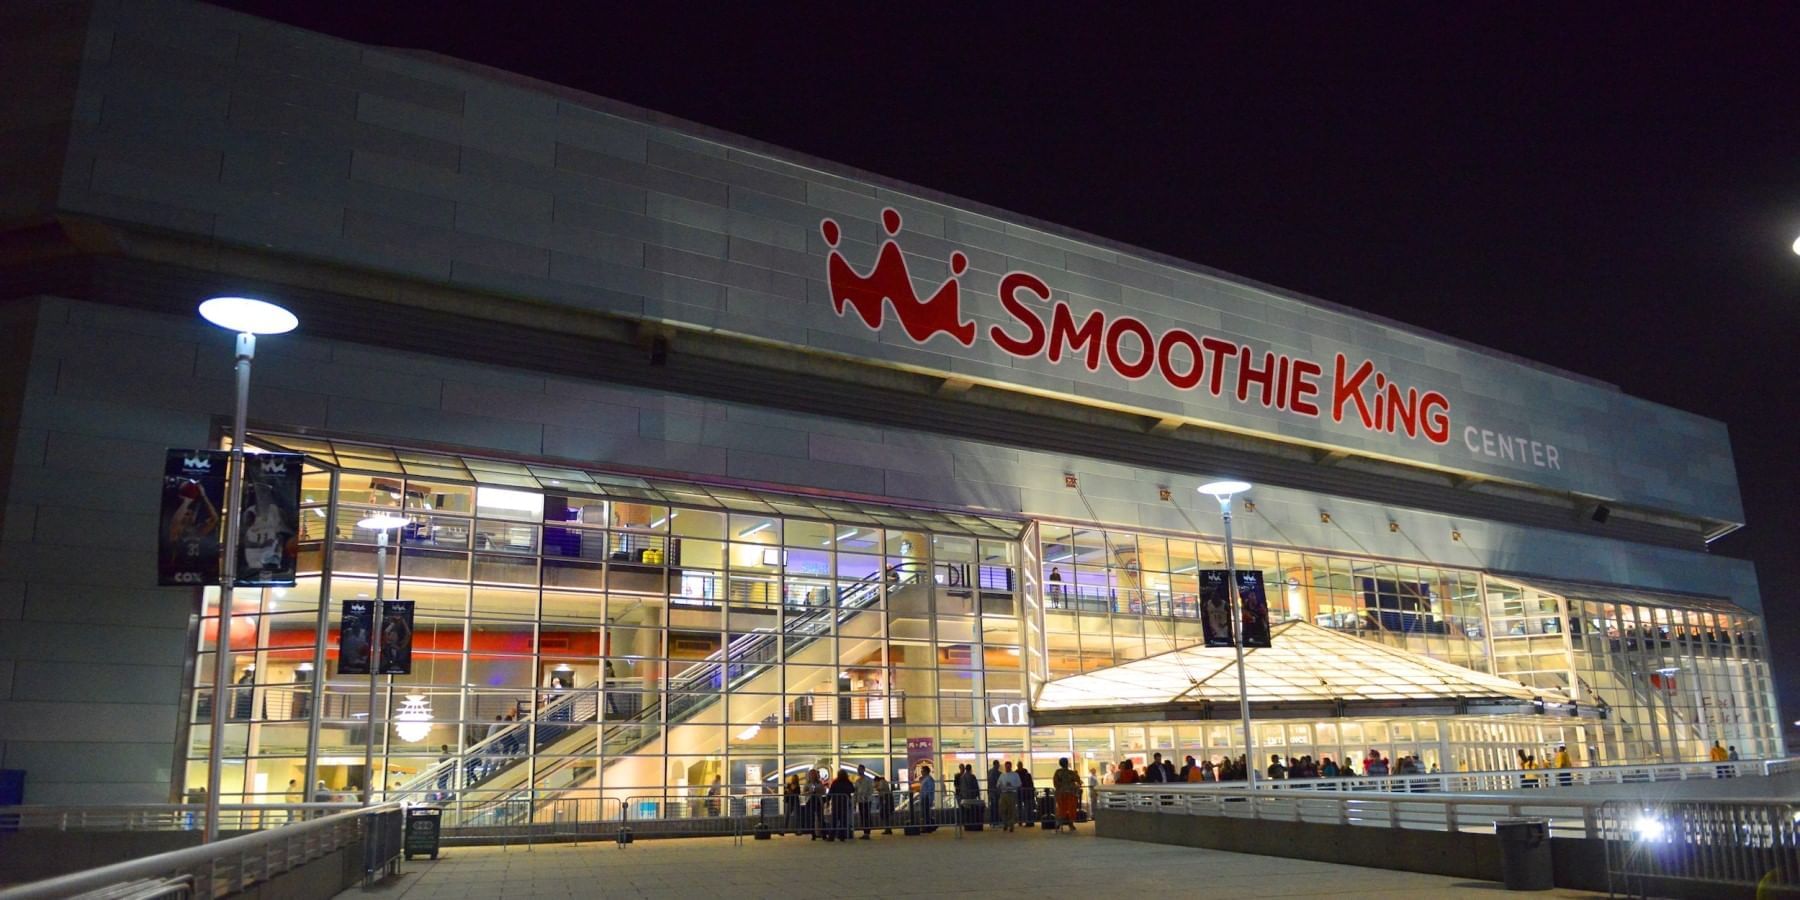 What To Eat At The Smoothie King Center, Home Of The New Orleans Pelicans &  VooDoo - Eater New Orleans